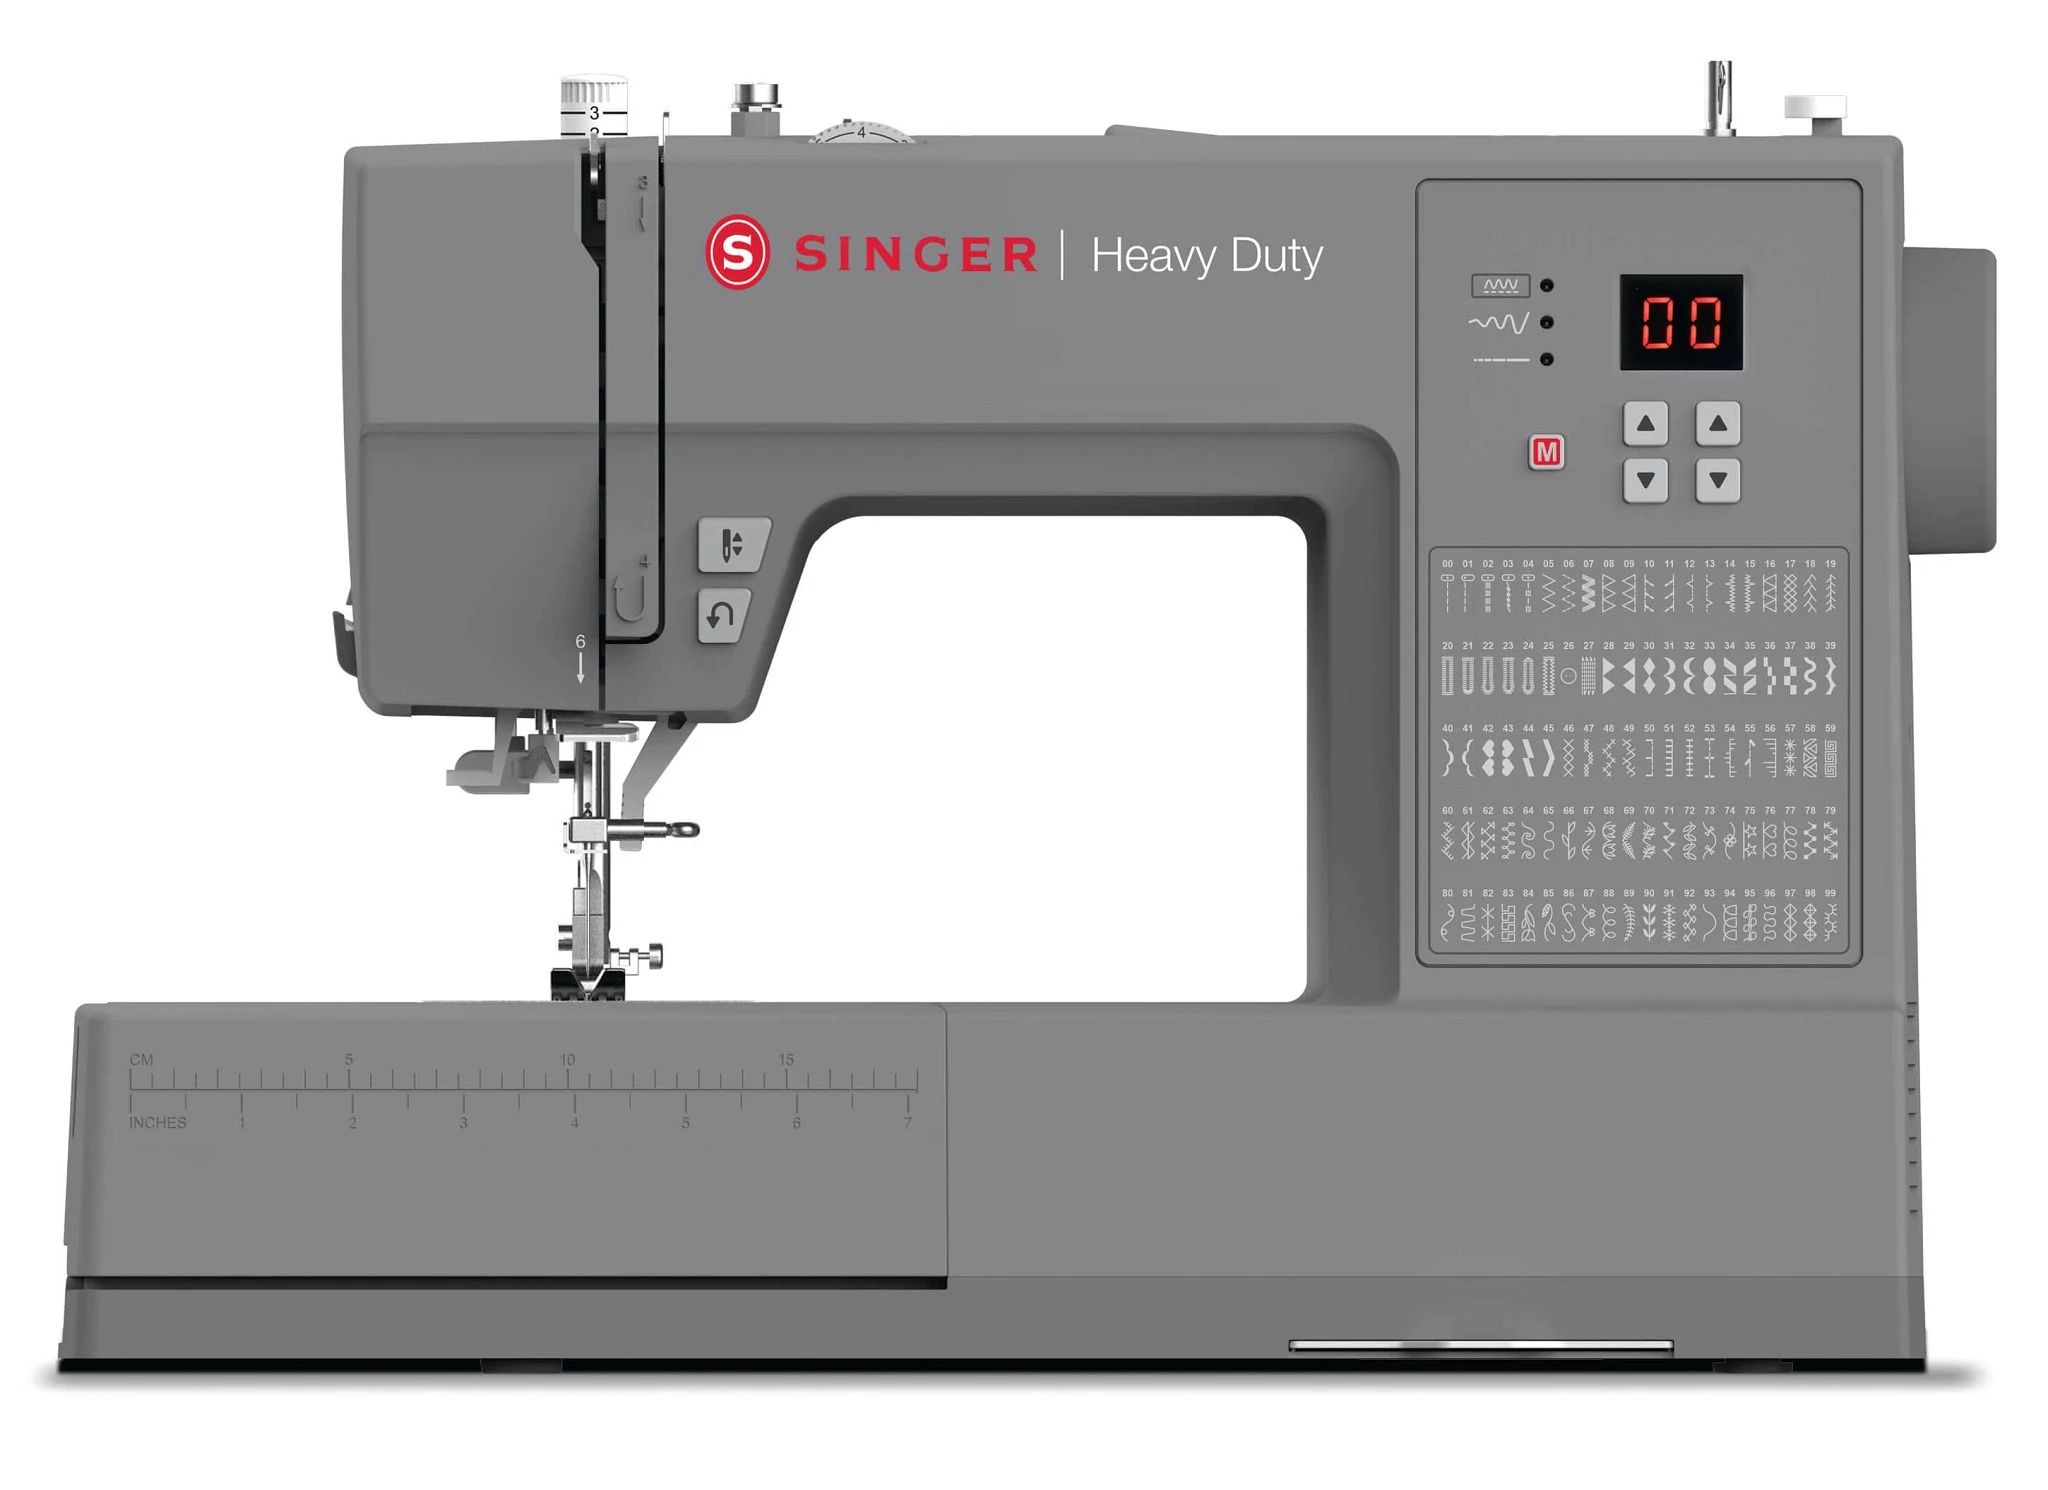 Christmas Gift- Singer 4452 Sewing Machine!! I'm open to ideas and tips! My  first, and SO EXCITED : r/sewing